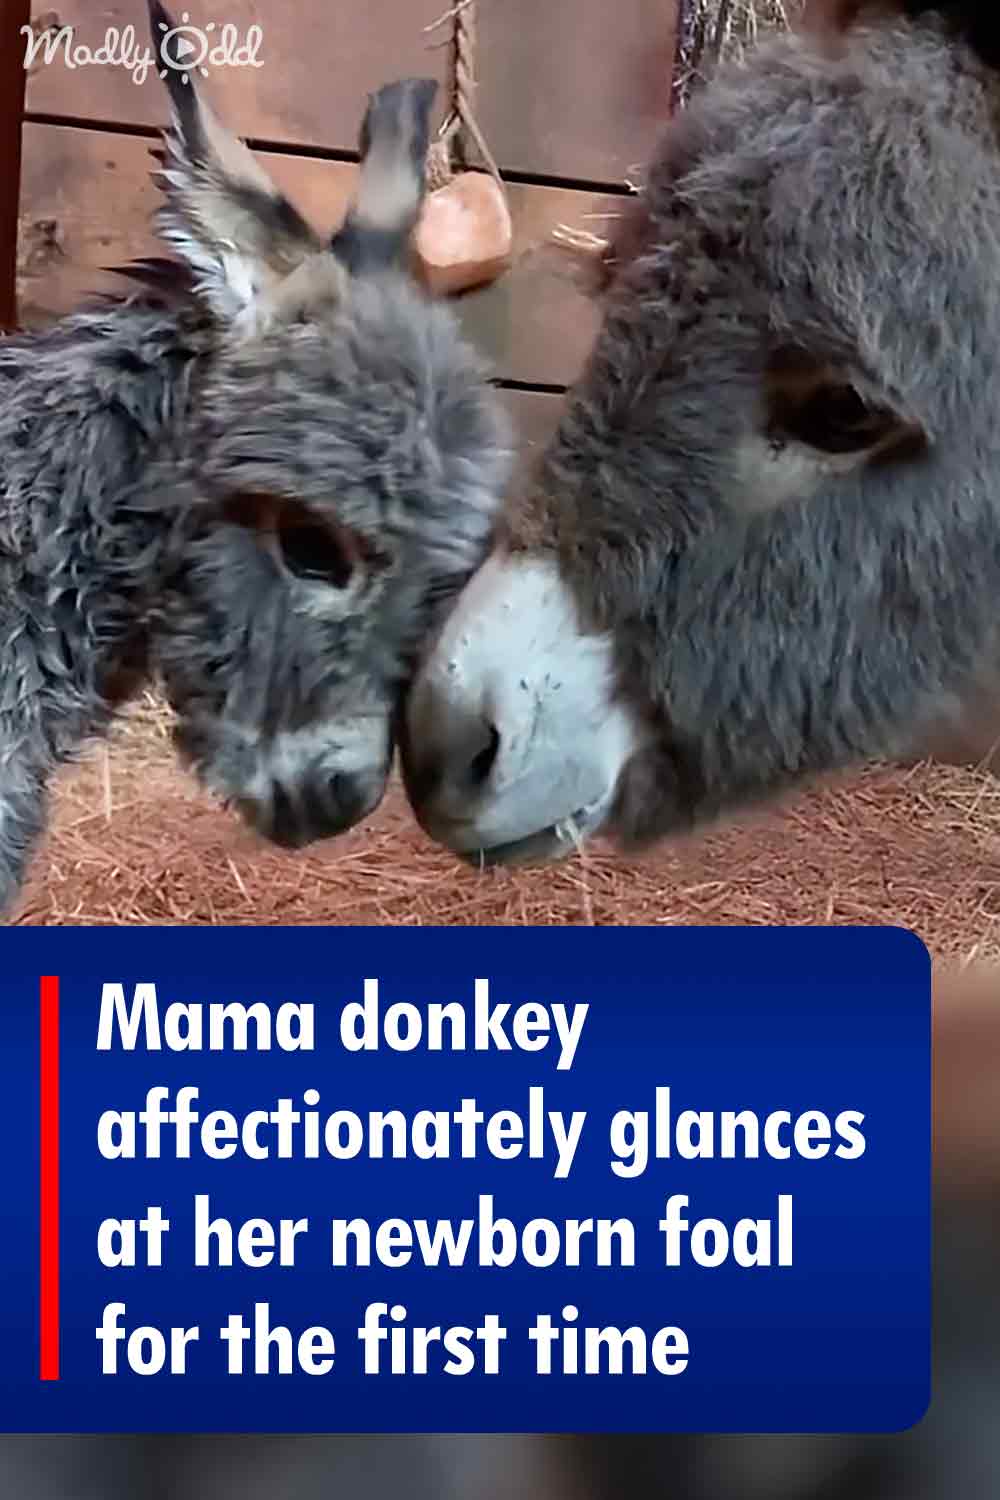 Mama donkey affectionately glances at her newborn foal for the first time